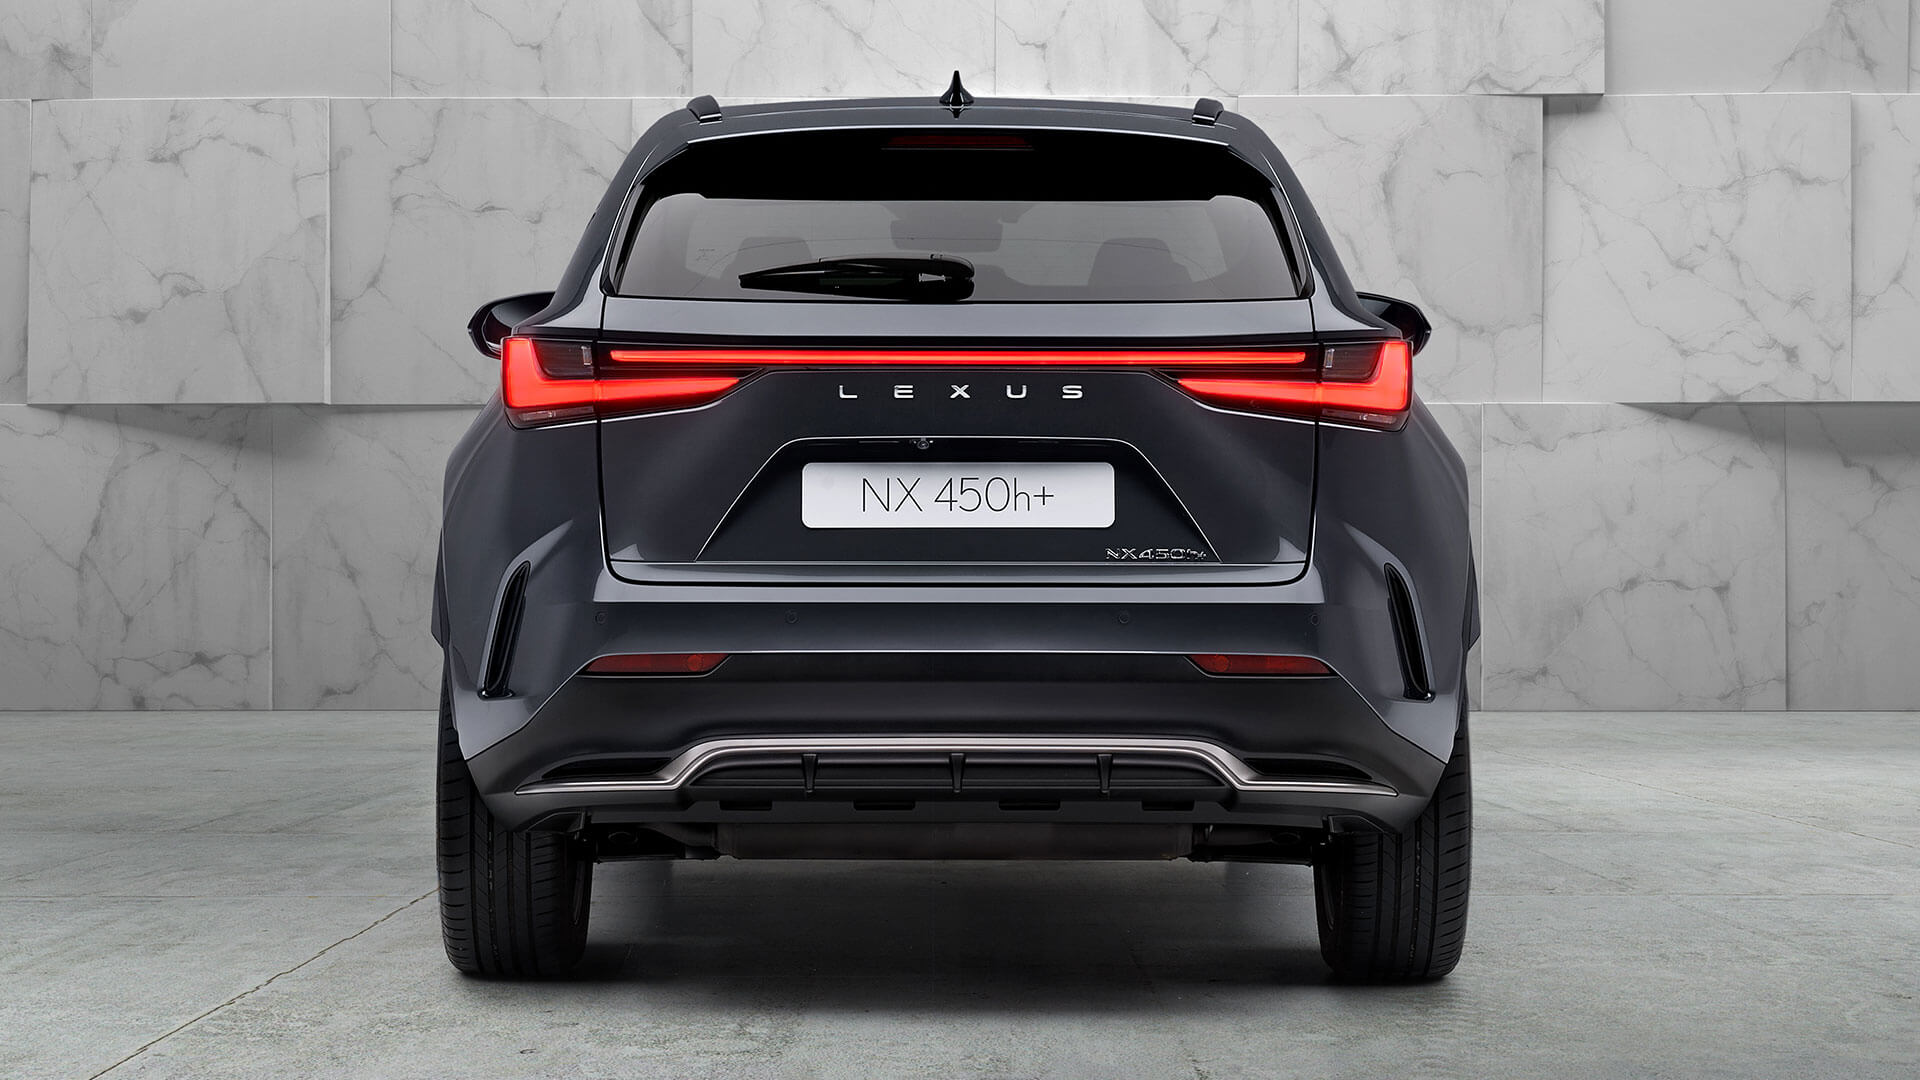 Rear view of the Lexus NX 450h+